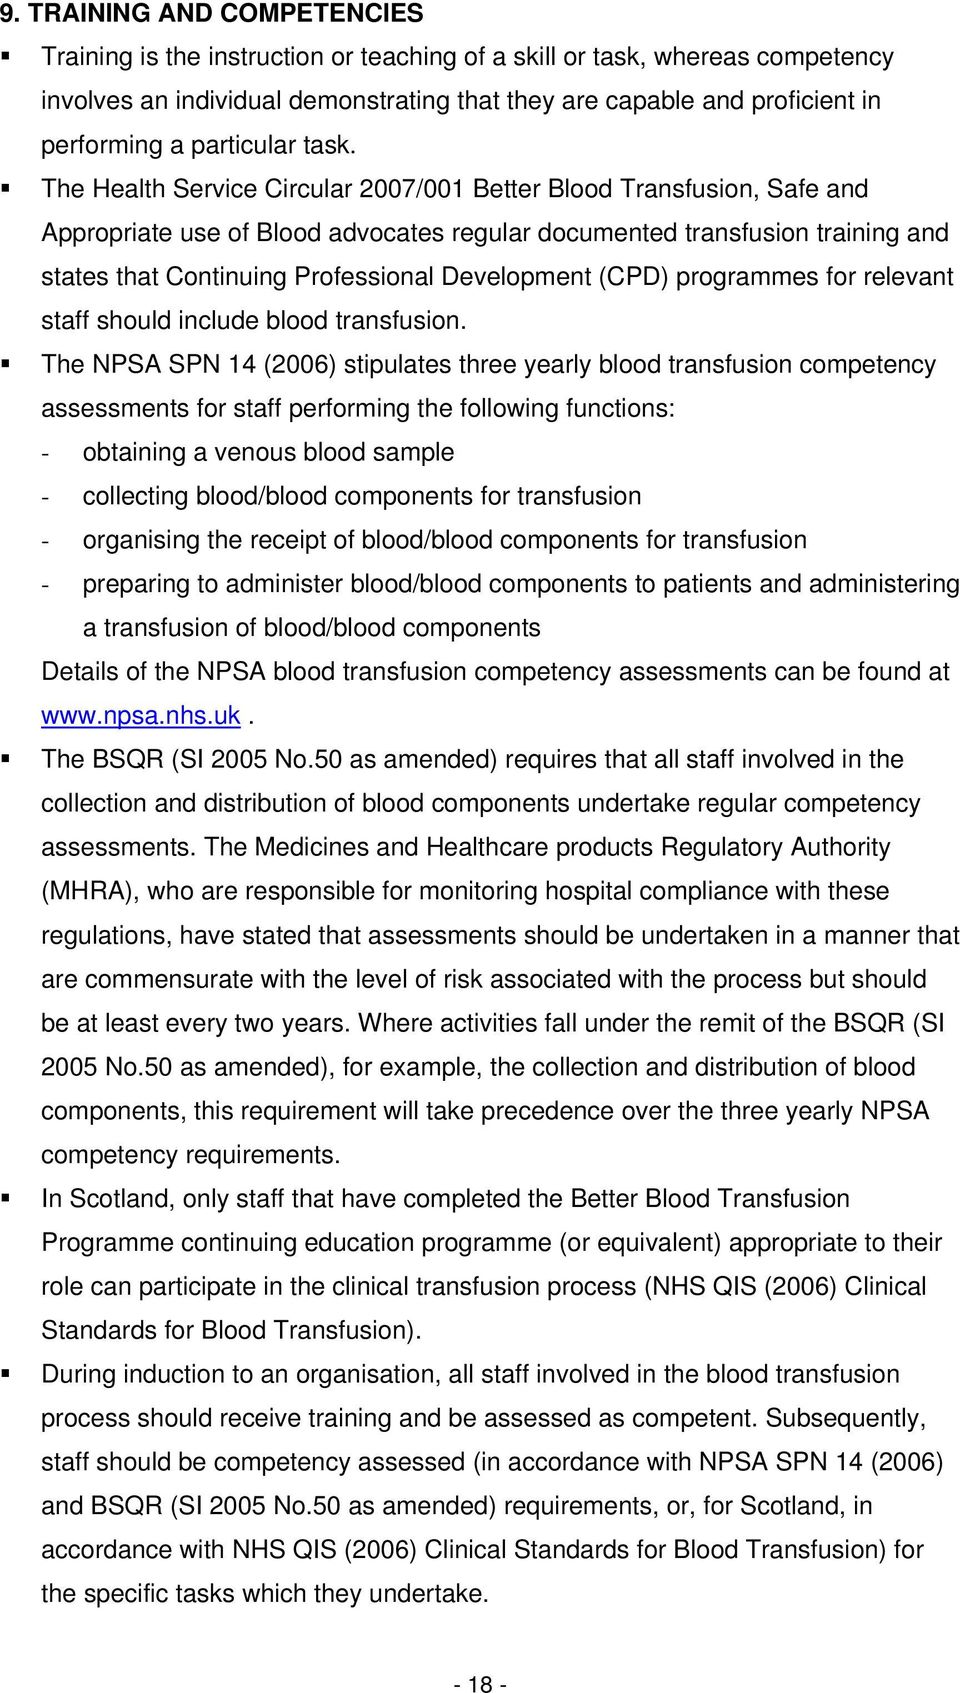 The Health Service Circular 2007/001 Better Blood Transfusion, Safe and Appropriate use of Blood advocates regular documented transfusion training and states that Continuing Professional Development